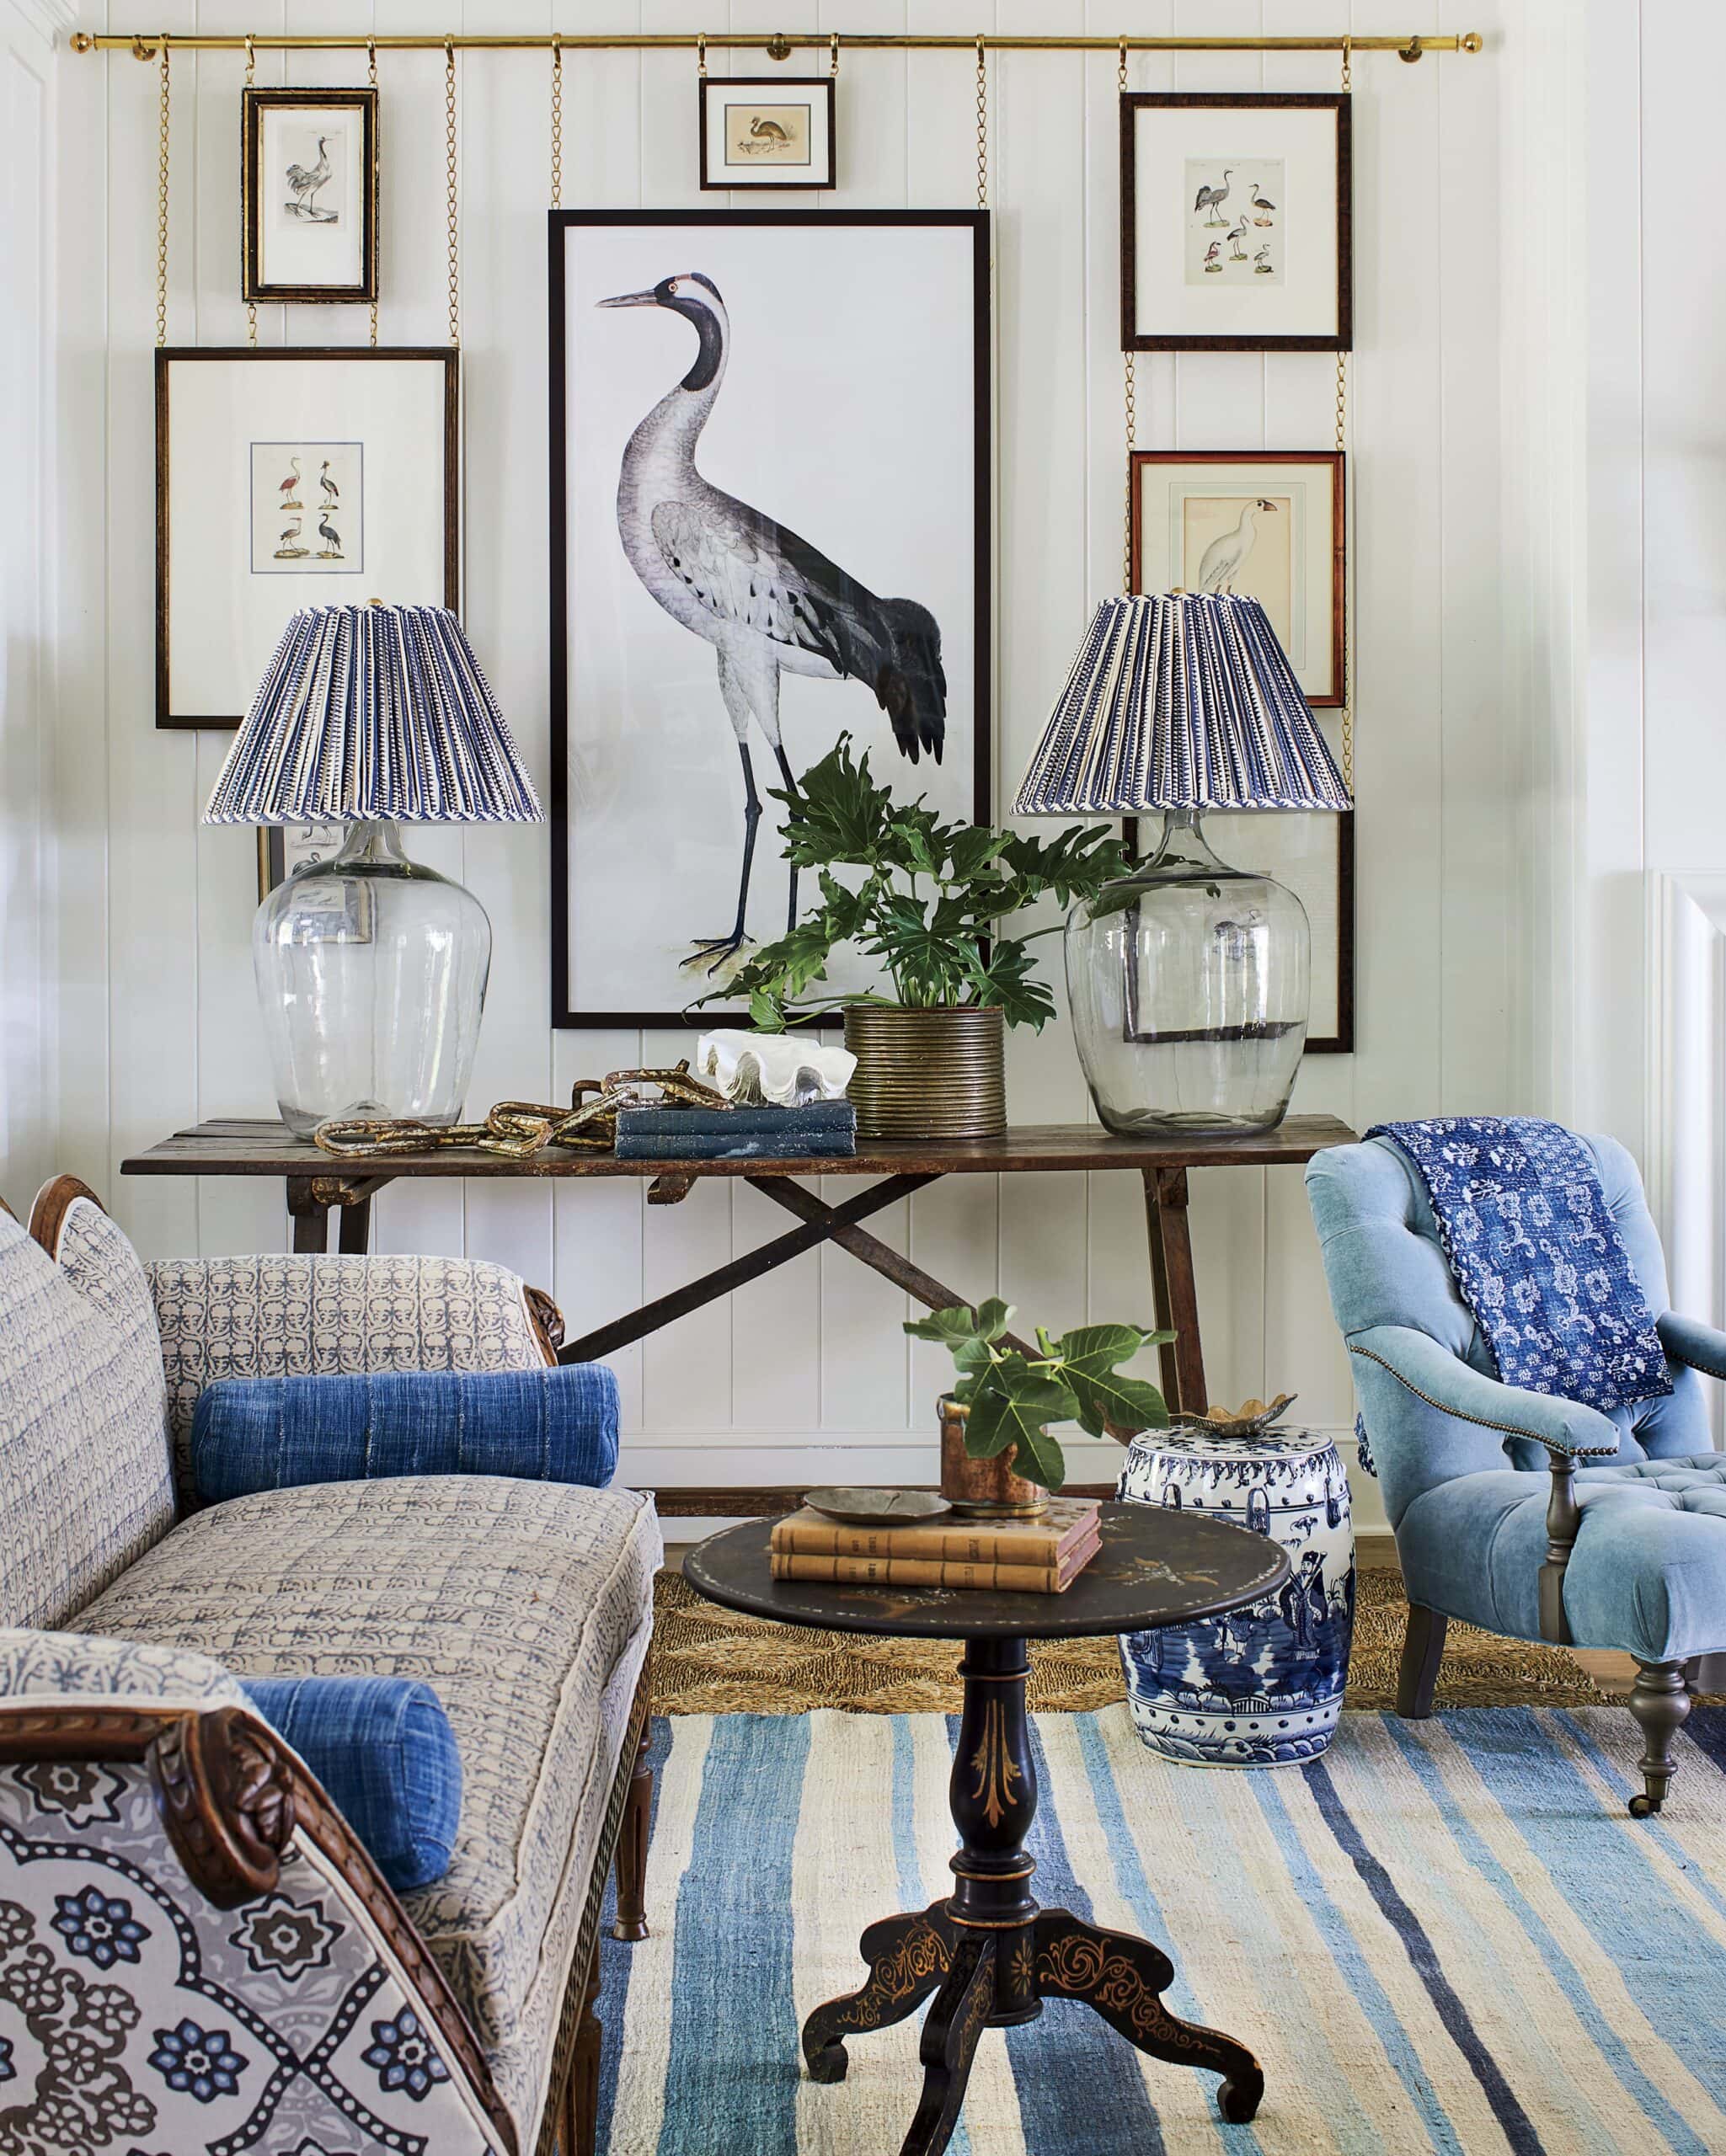 Home Tour: Coastal Serenity Meets Southern Charm in This Crane